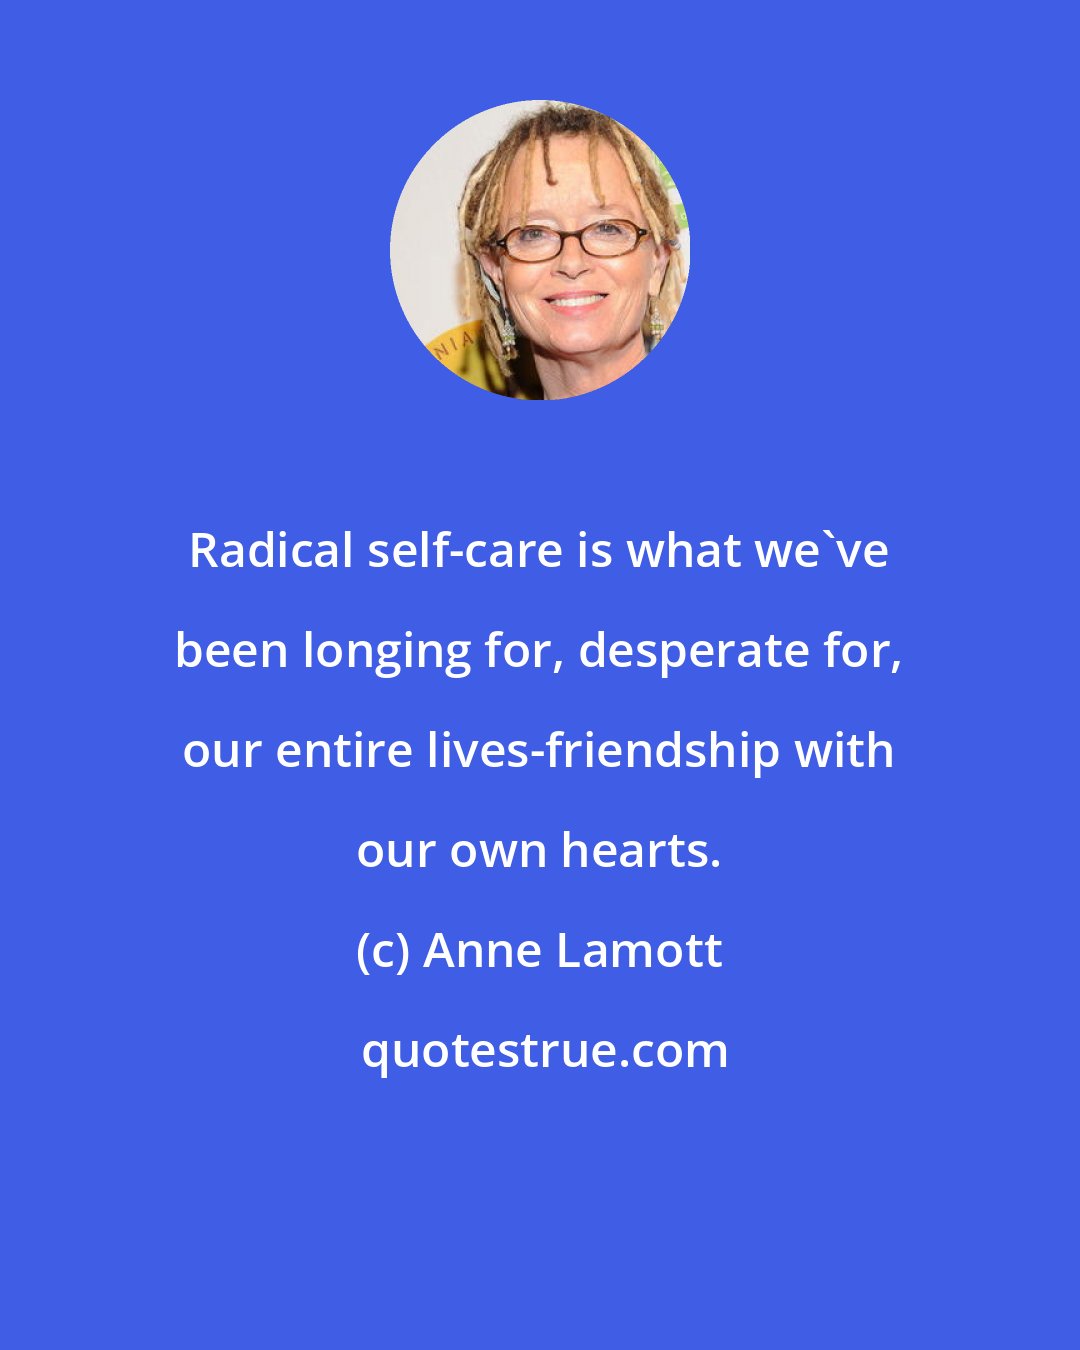 Anne Lamott: Radical self-care is what we've been longing for, desperate for, our entire lives-friendship with our own hearts.